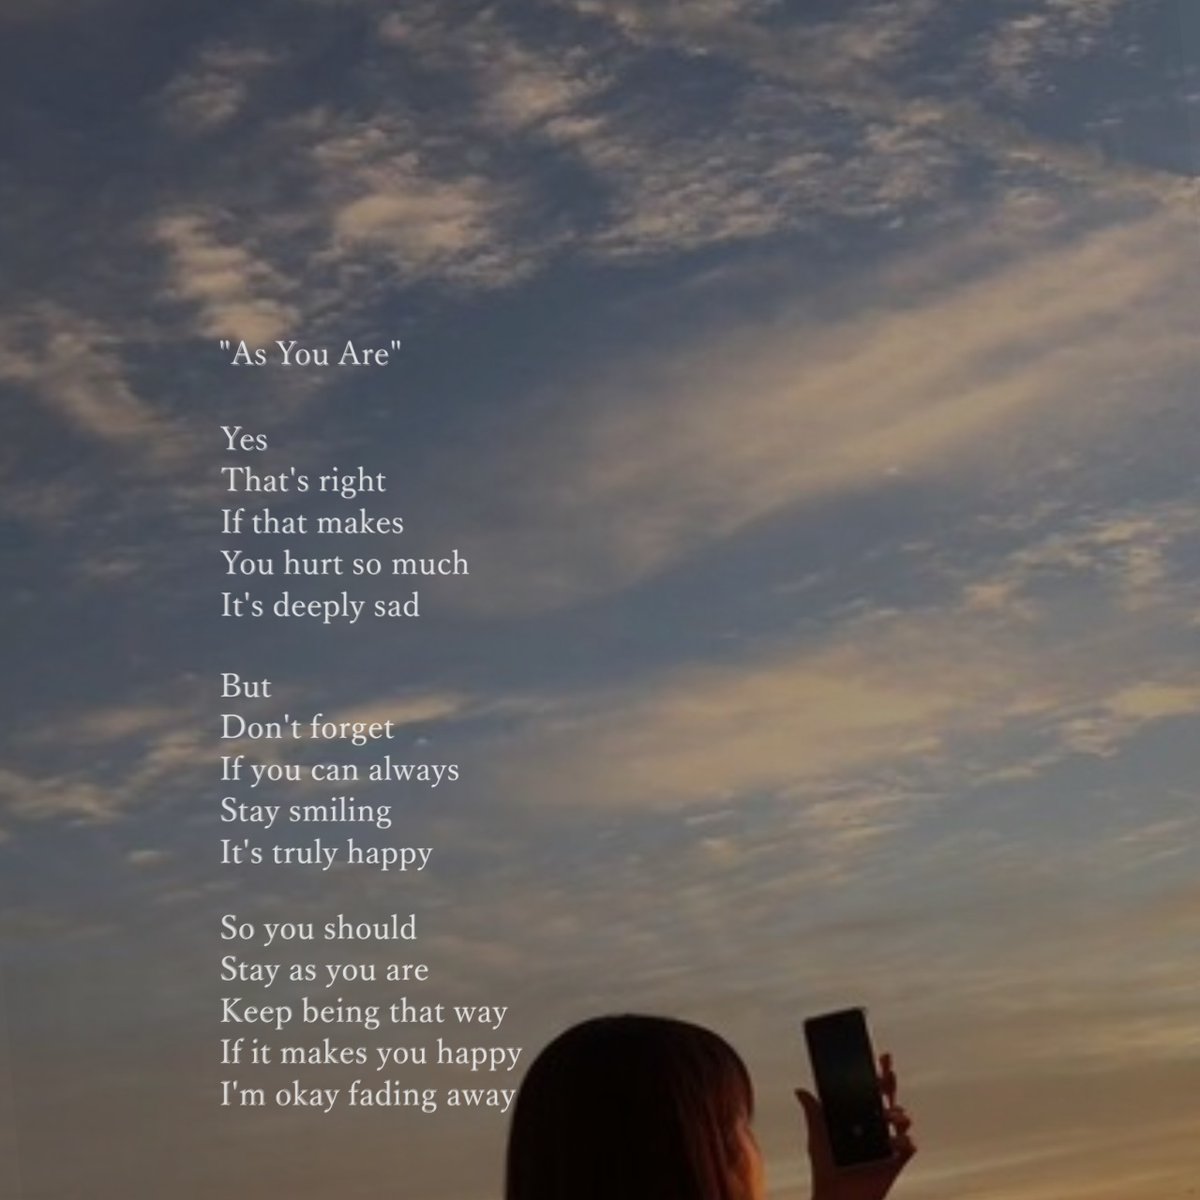 gm 'As You Are' Photography by mainu #NFTCommunity #vssink #vss365 #poetryNFT #poetry #prompts #romance #lovepoetry #valentinesday